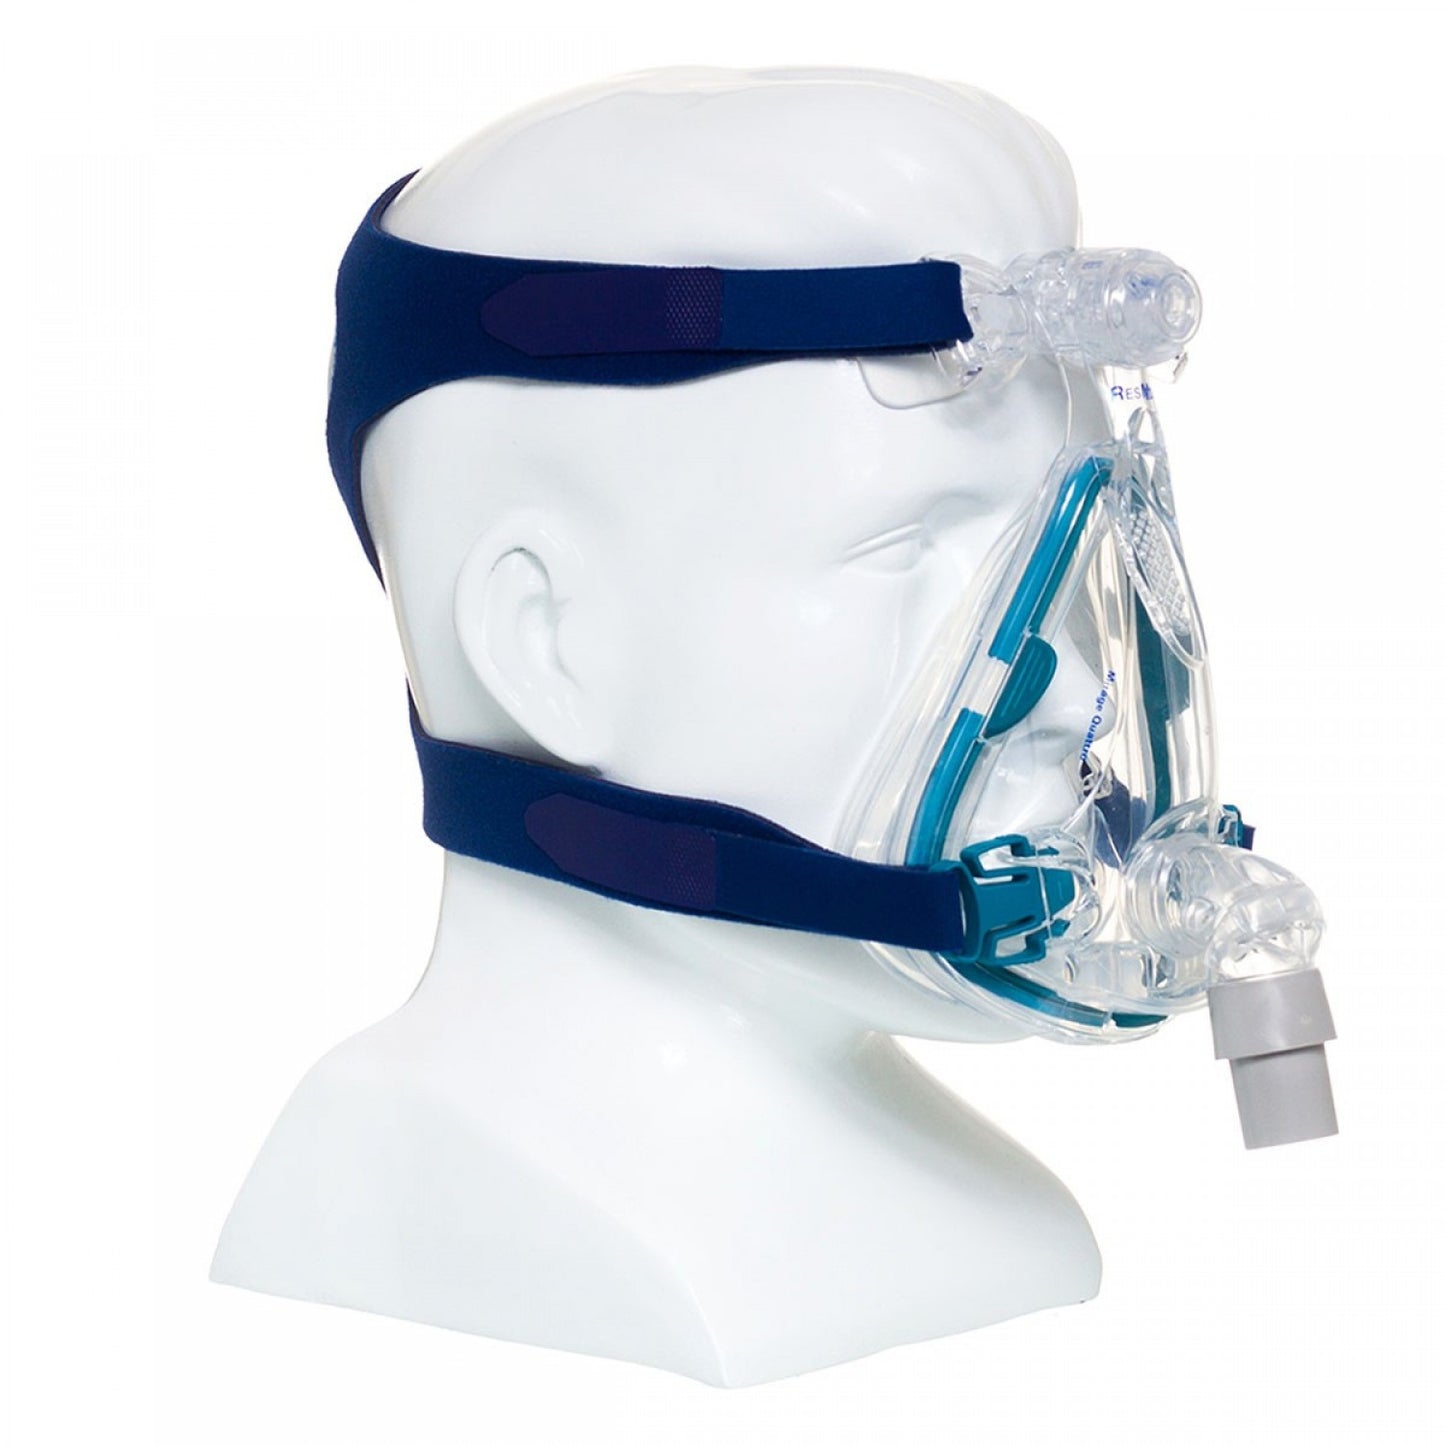 ResMed Μirage QUATTRO Full-Face CPAP/BiPAP Mask